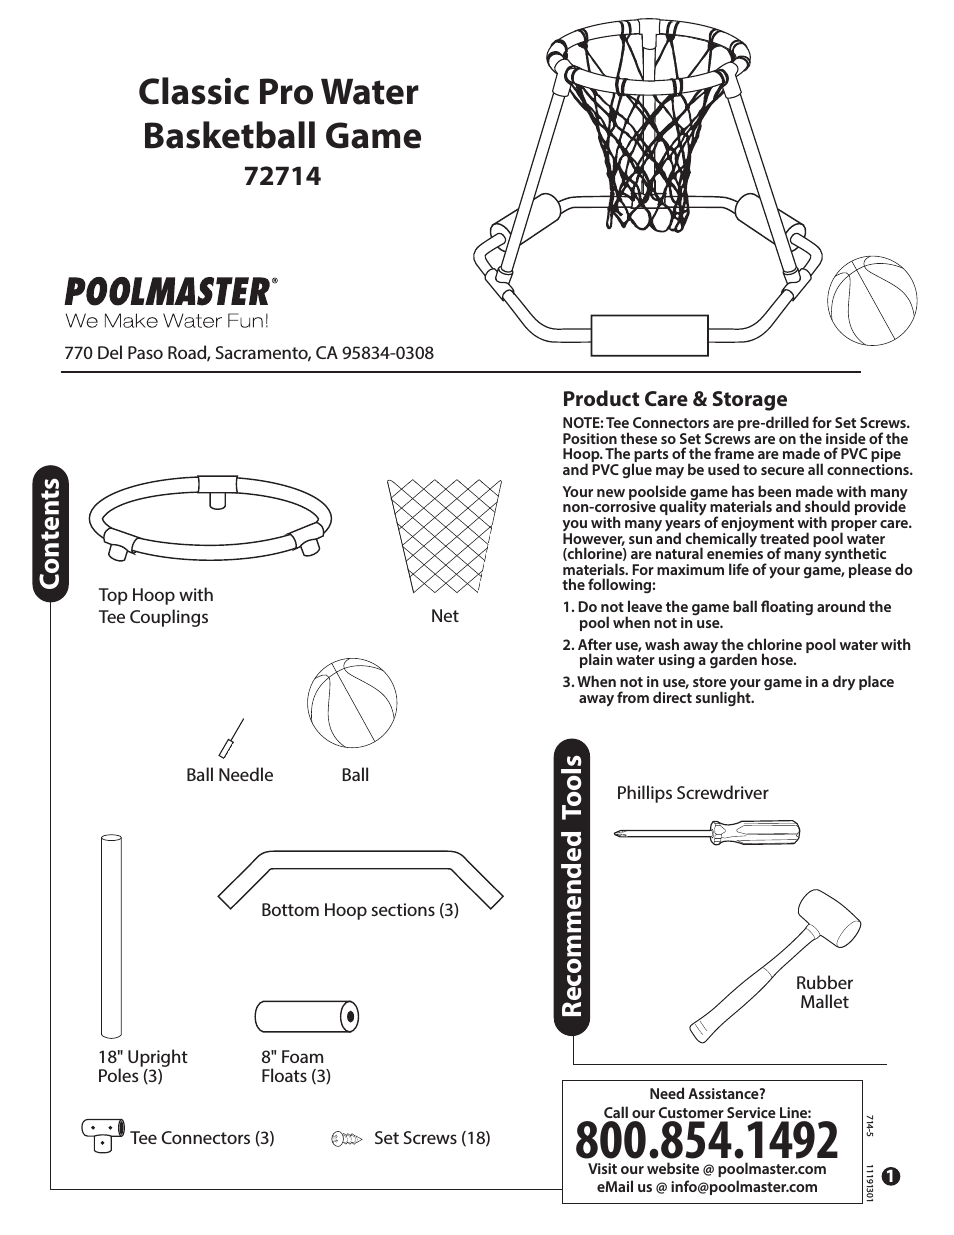 72714 Classic Pro Water Basketball Game